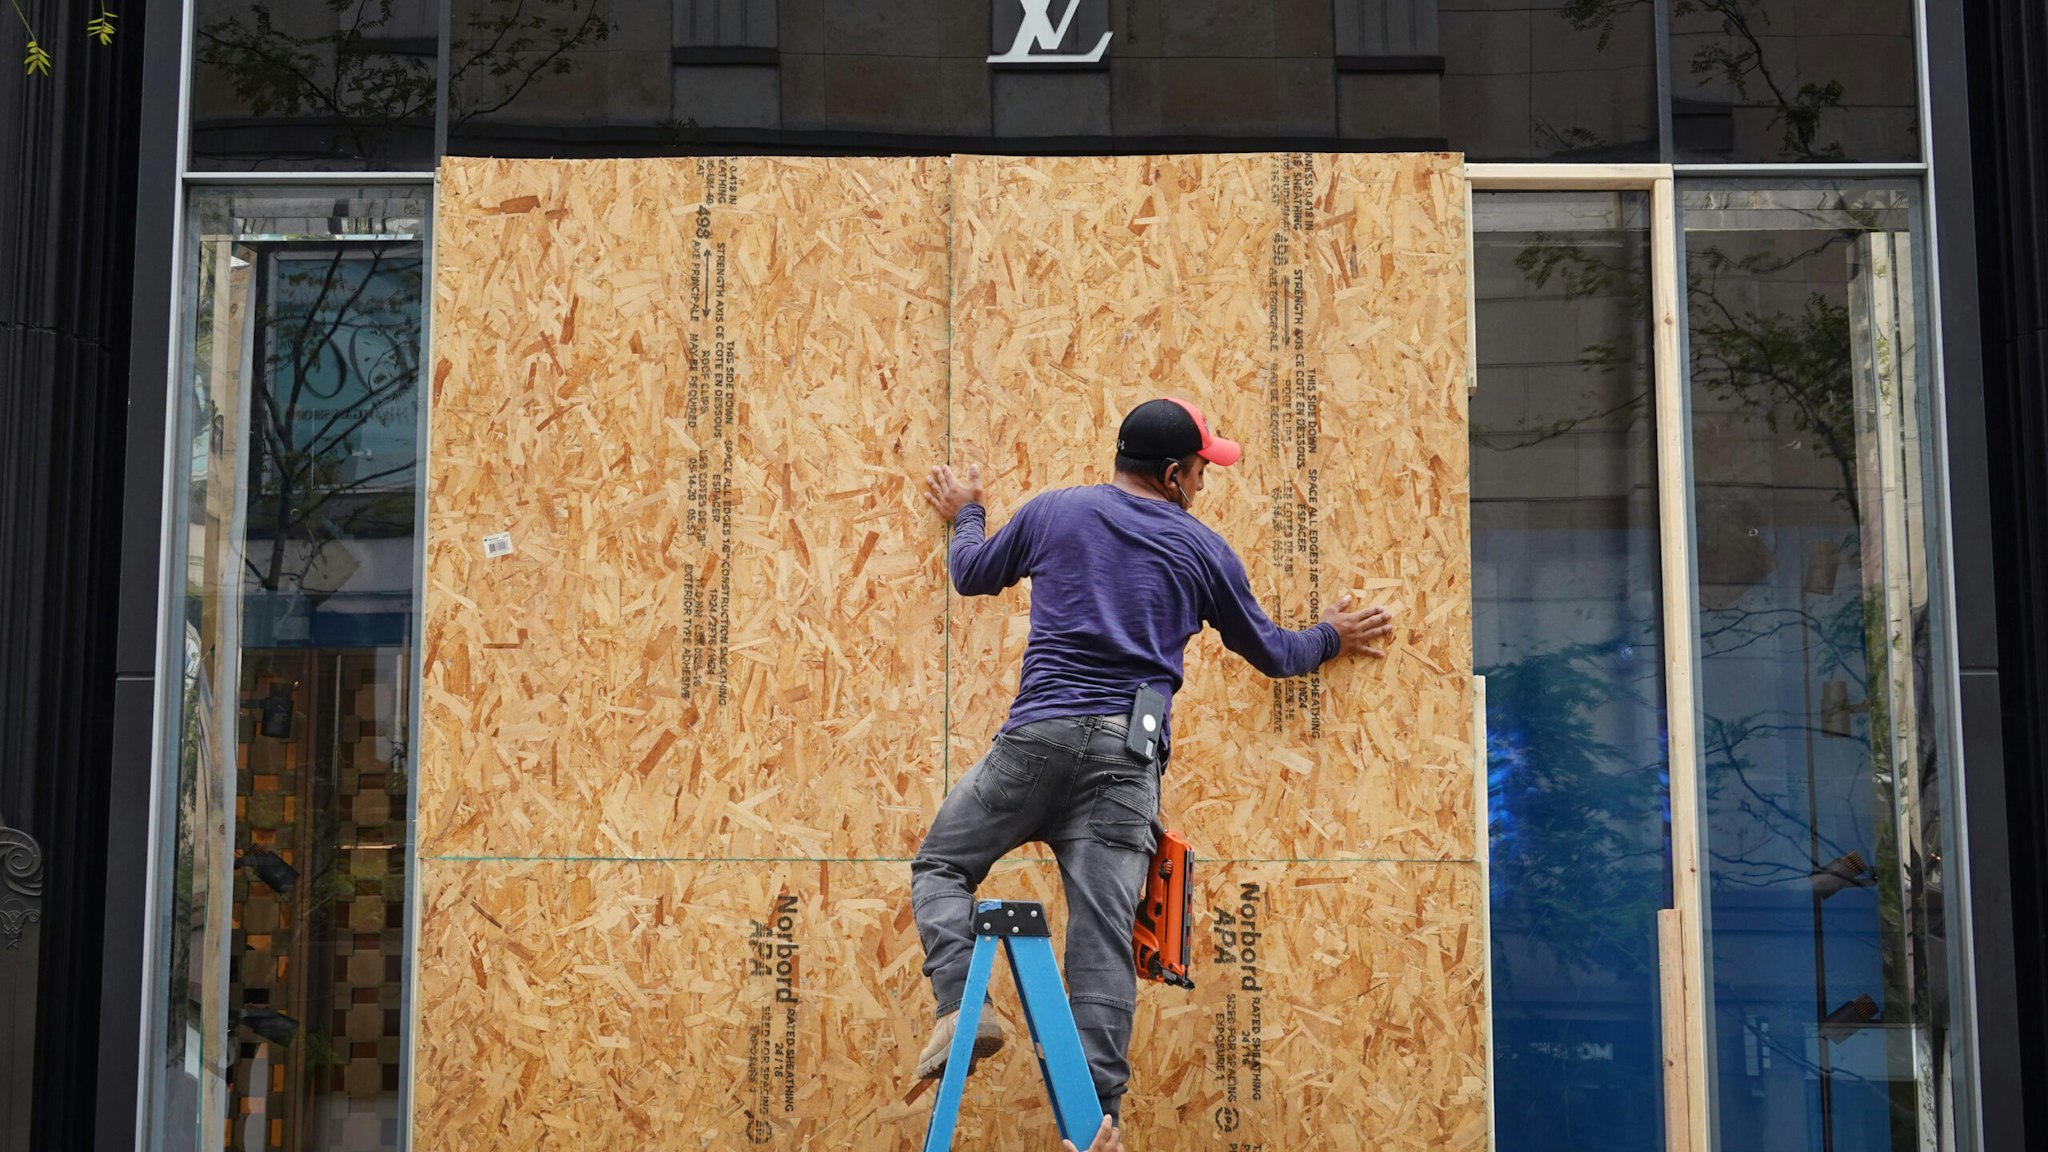 CHICAGO, ILLINOIS - AUGUST 10: Workers make repairs to the Louis Vuitton store after it was looted on August 10, 2020 in Chicago, Illinois. Police made more than 100 arrests during the night as widespread looting and disorderly conduct was reported downtown and other areas of the city. Officials believe the violence had apparently grown out of a shoot out between police and a suspect. (Photo by Scott Olson/Getty Images)